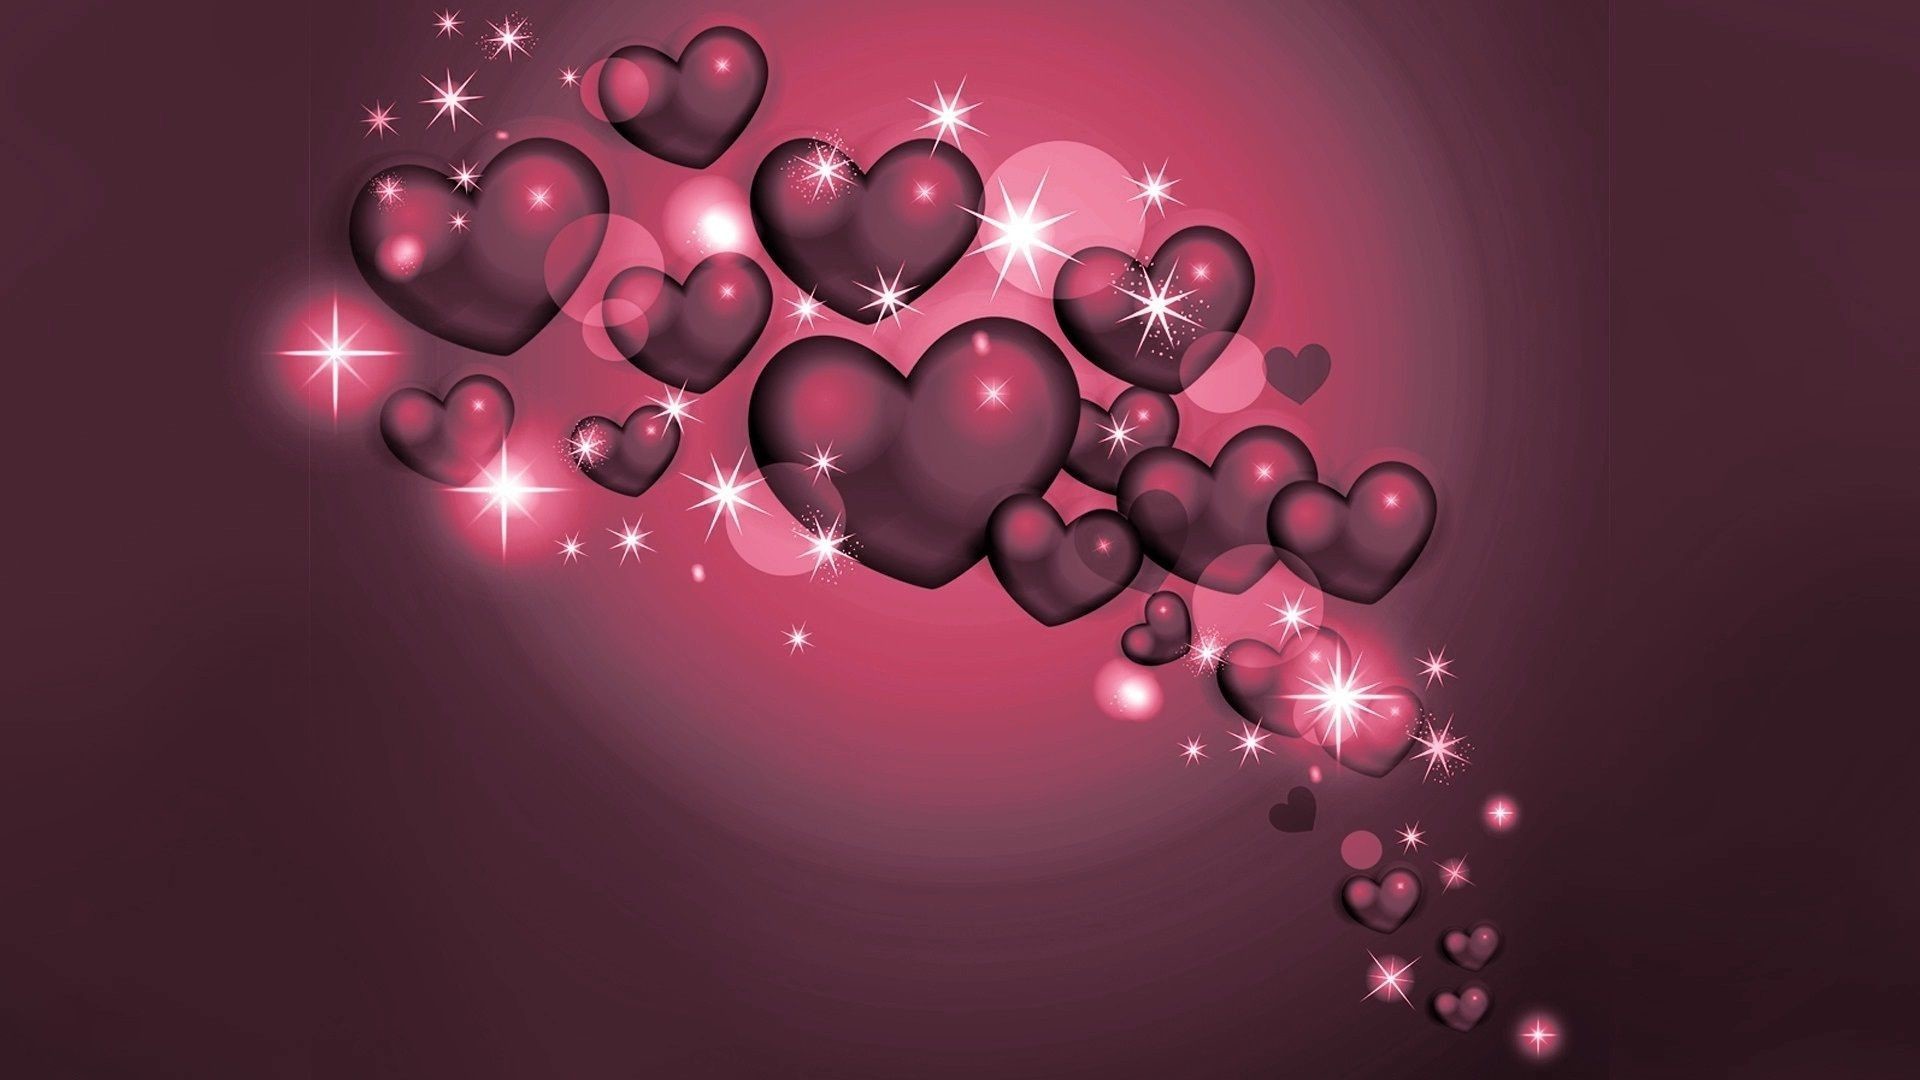 1920x1200 Wallpapers Heart Love Group 77 Quot Gt 1920x1080